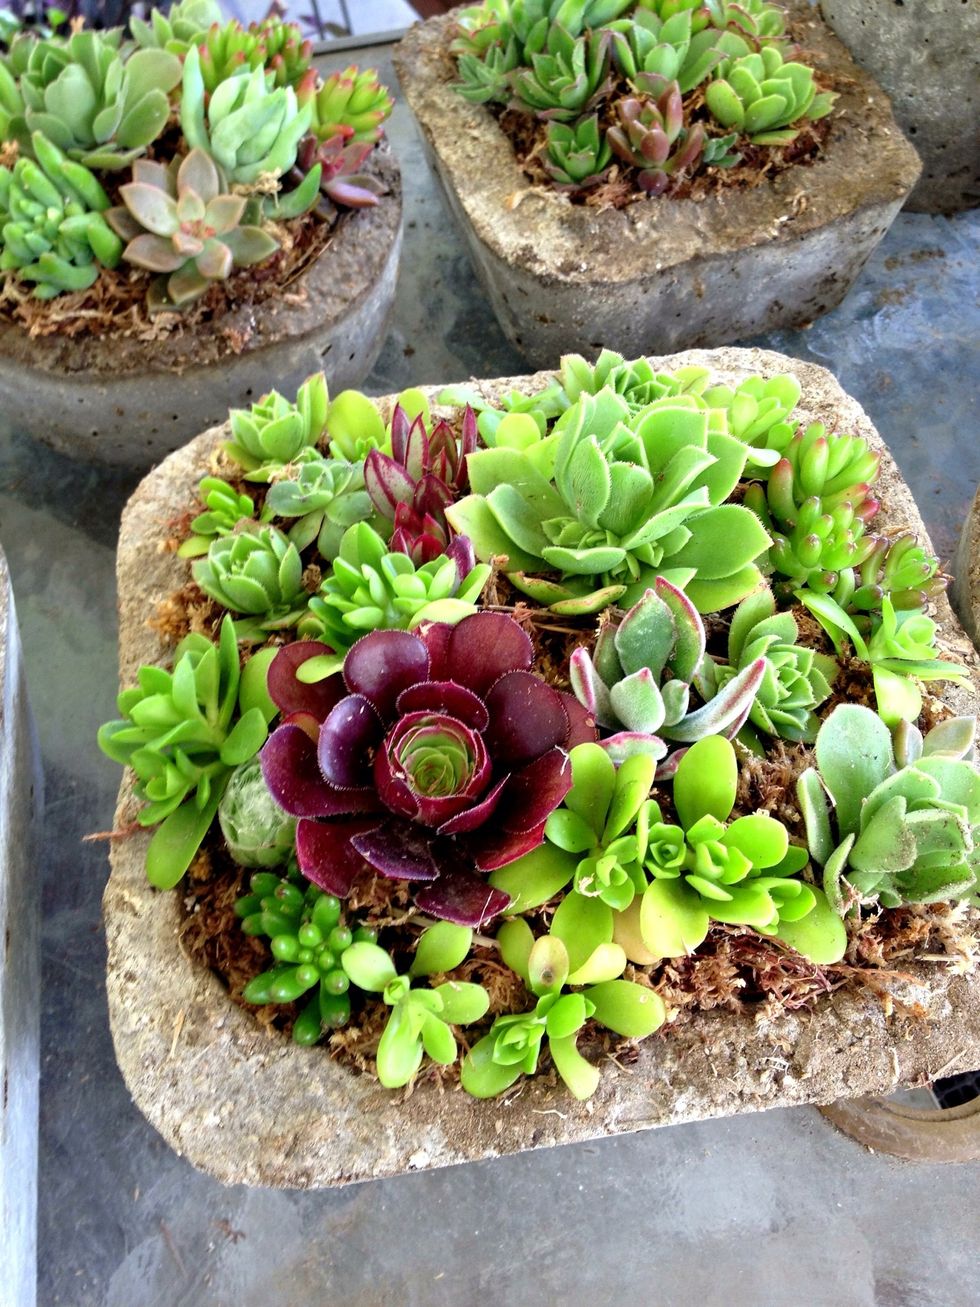 I like to use rosette style succulents, but they would look nice with some aloe or cacti too.